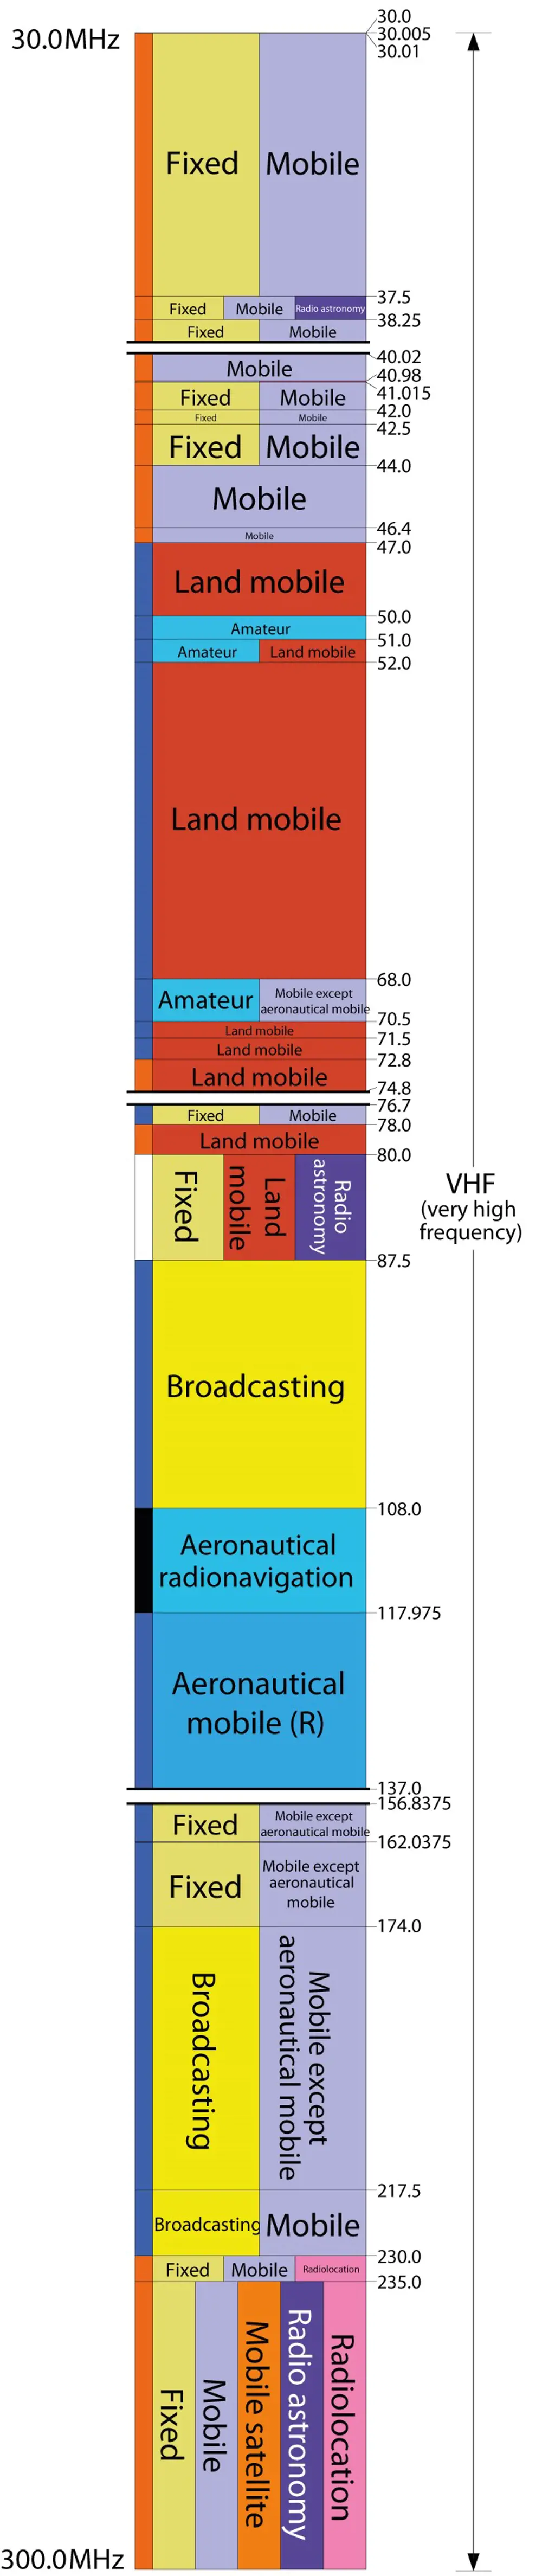 A chart showing the different frequency allocation of the radio spectrum between 30 and 300 MHz.